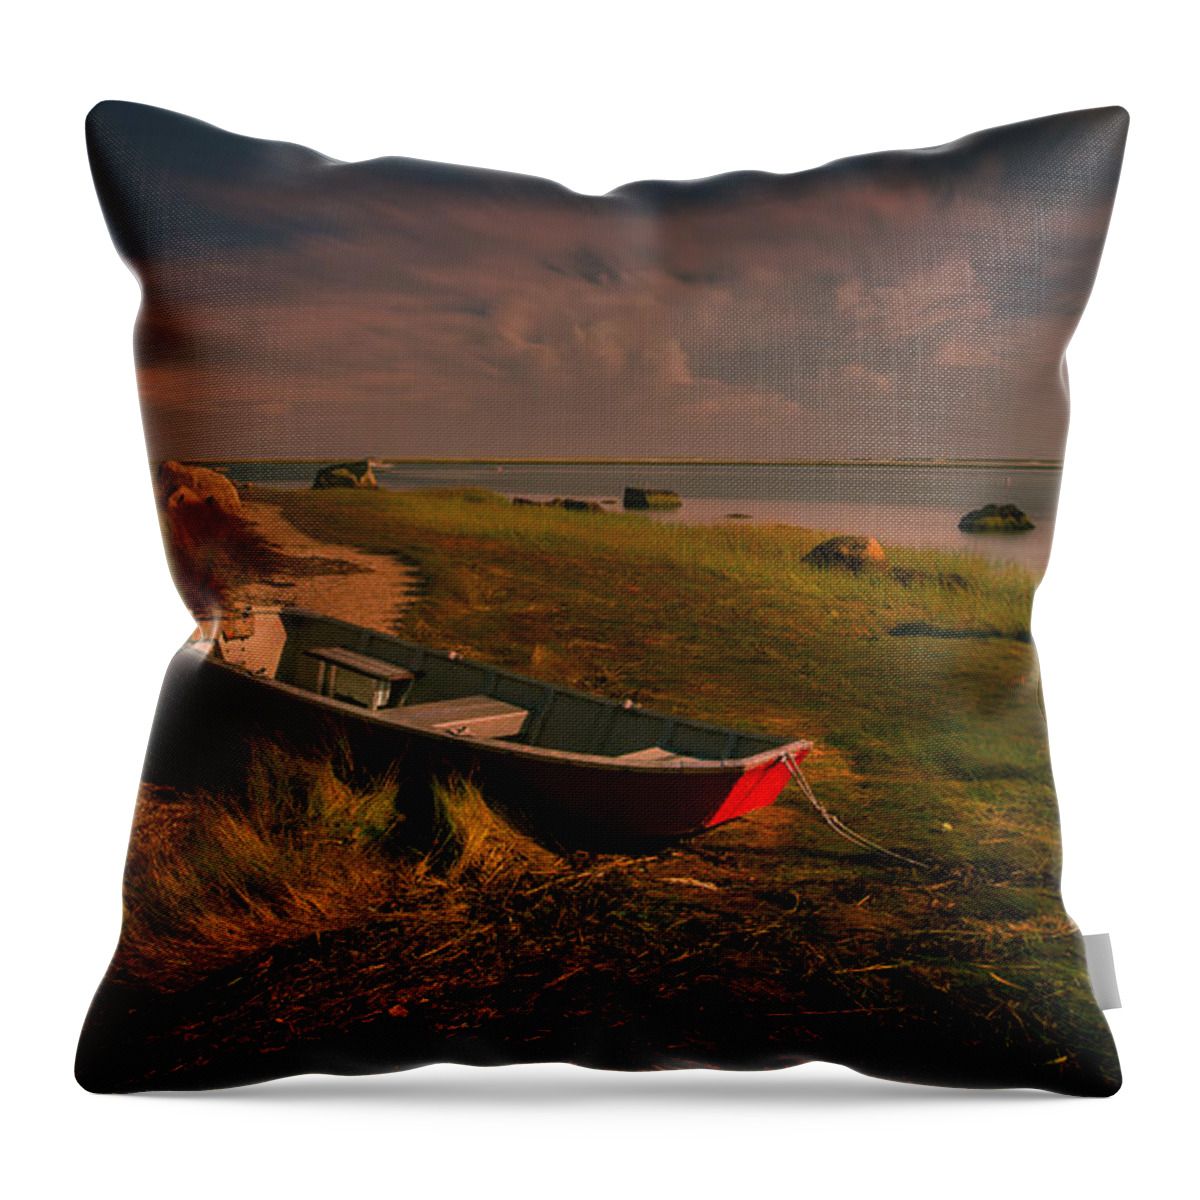 Past Throw Pillow featuring the photograph Past by Darius Aniunas